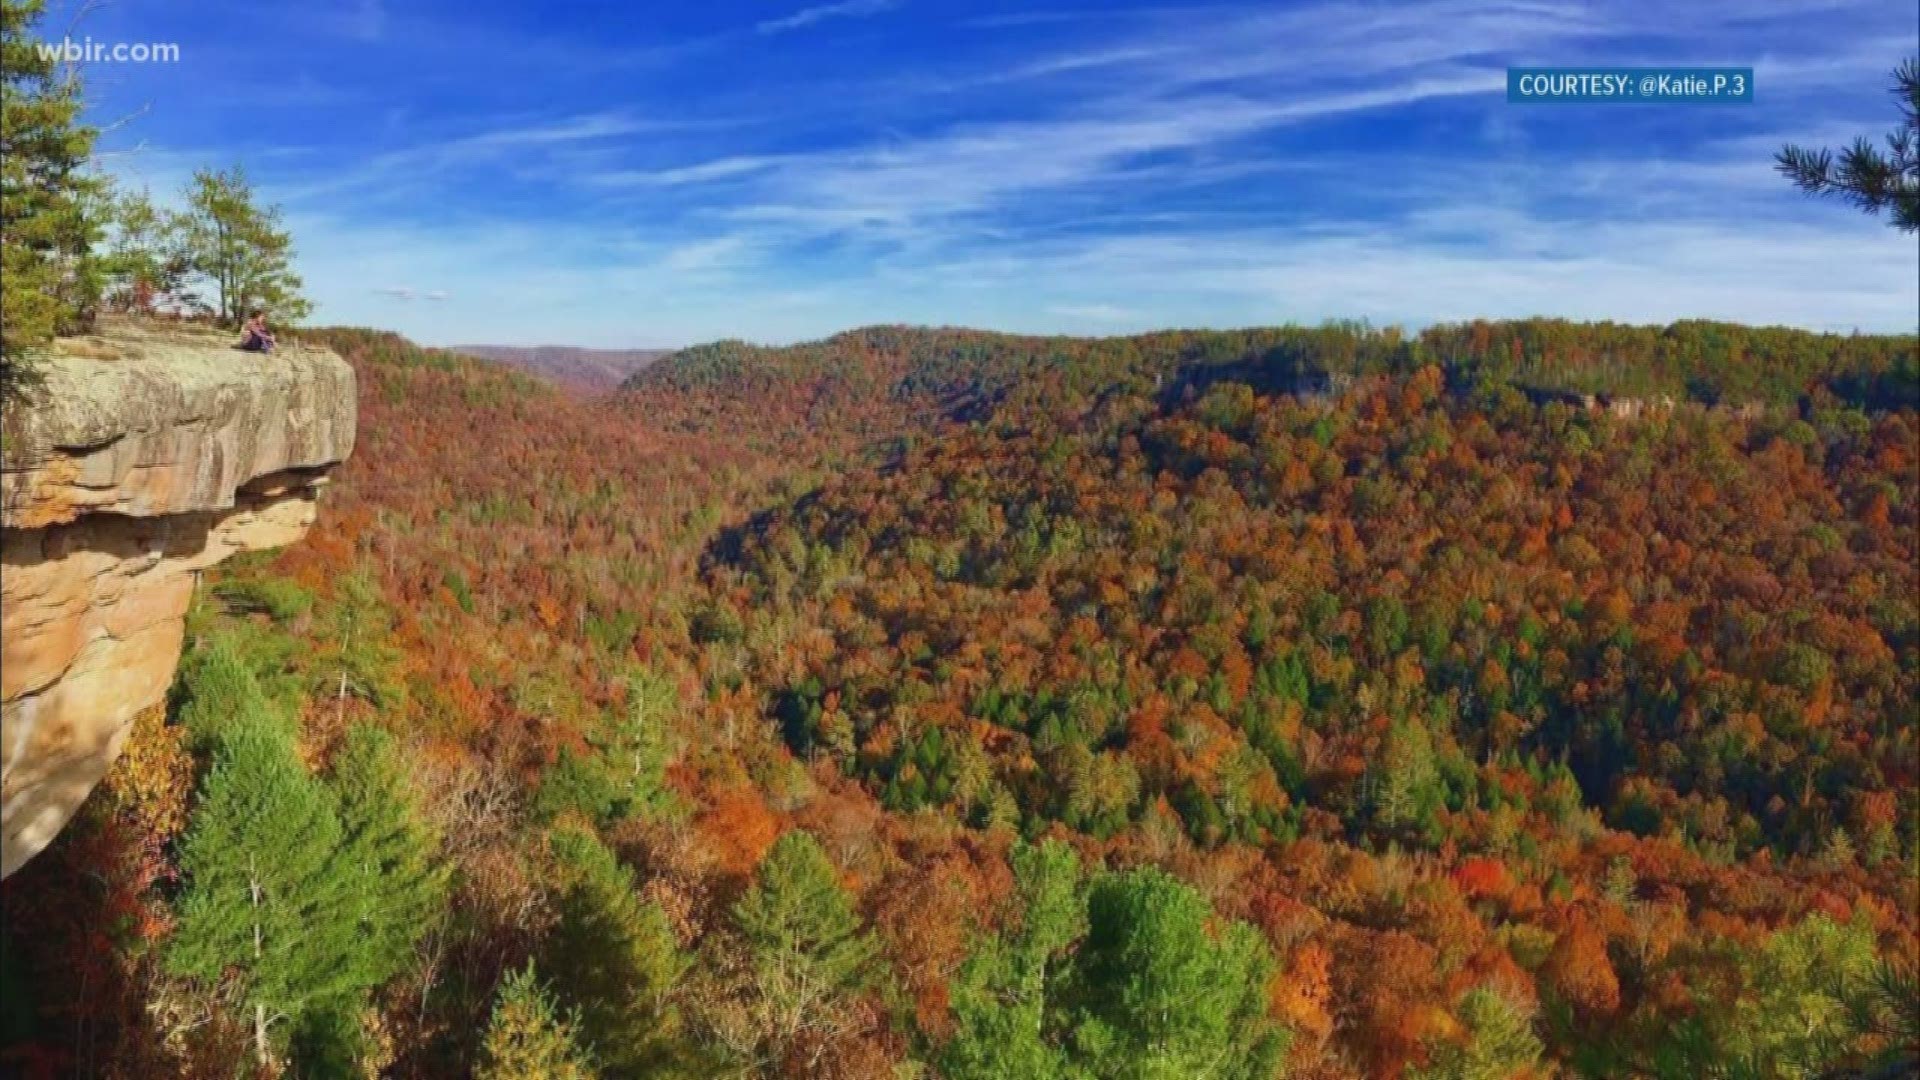 Dave Jones with the TN Department of Tourist Development shares where people who are colorblind can visit special sites to help them view the fall foliage